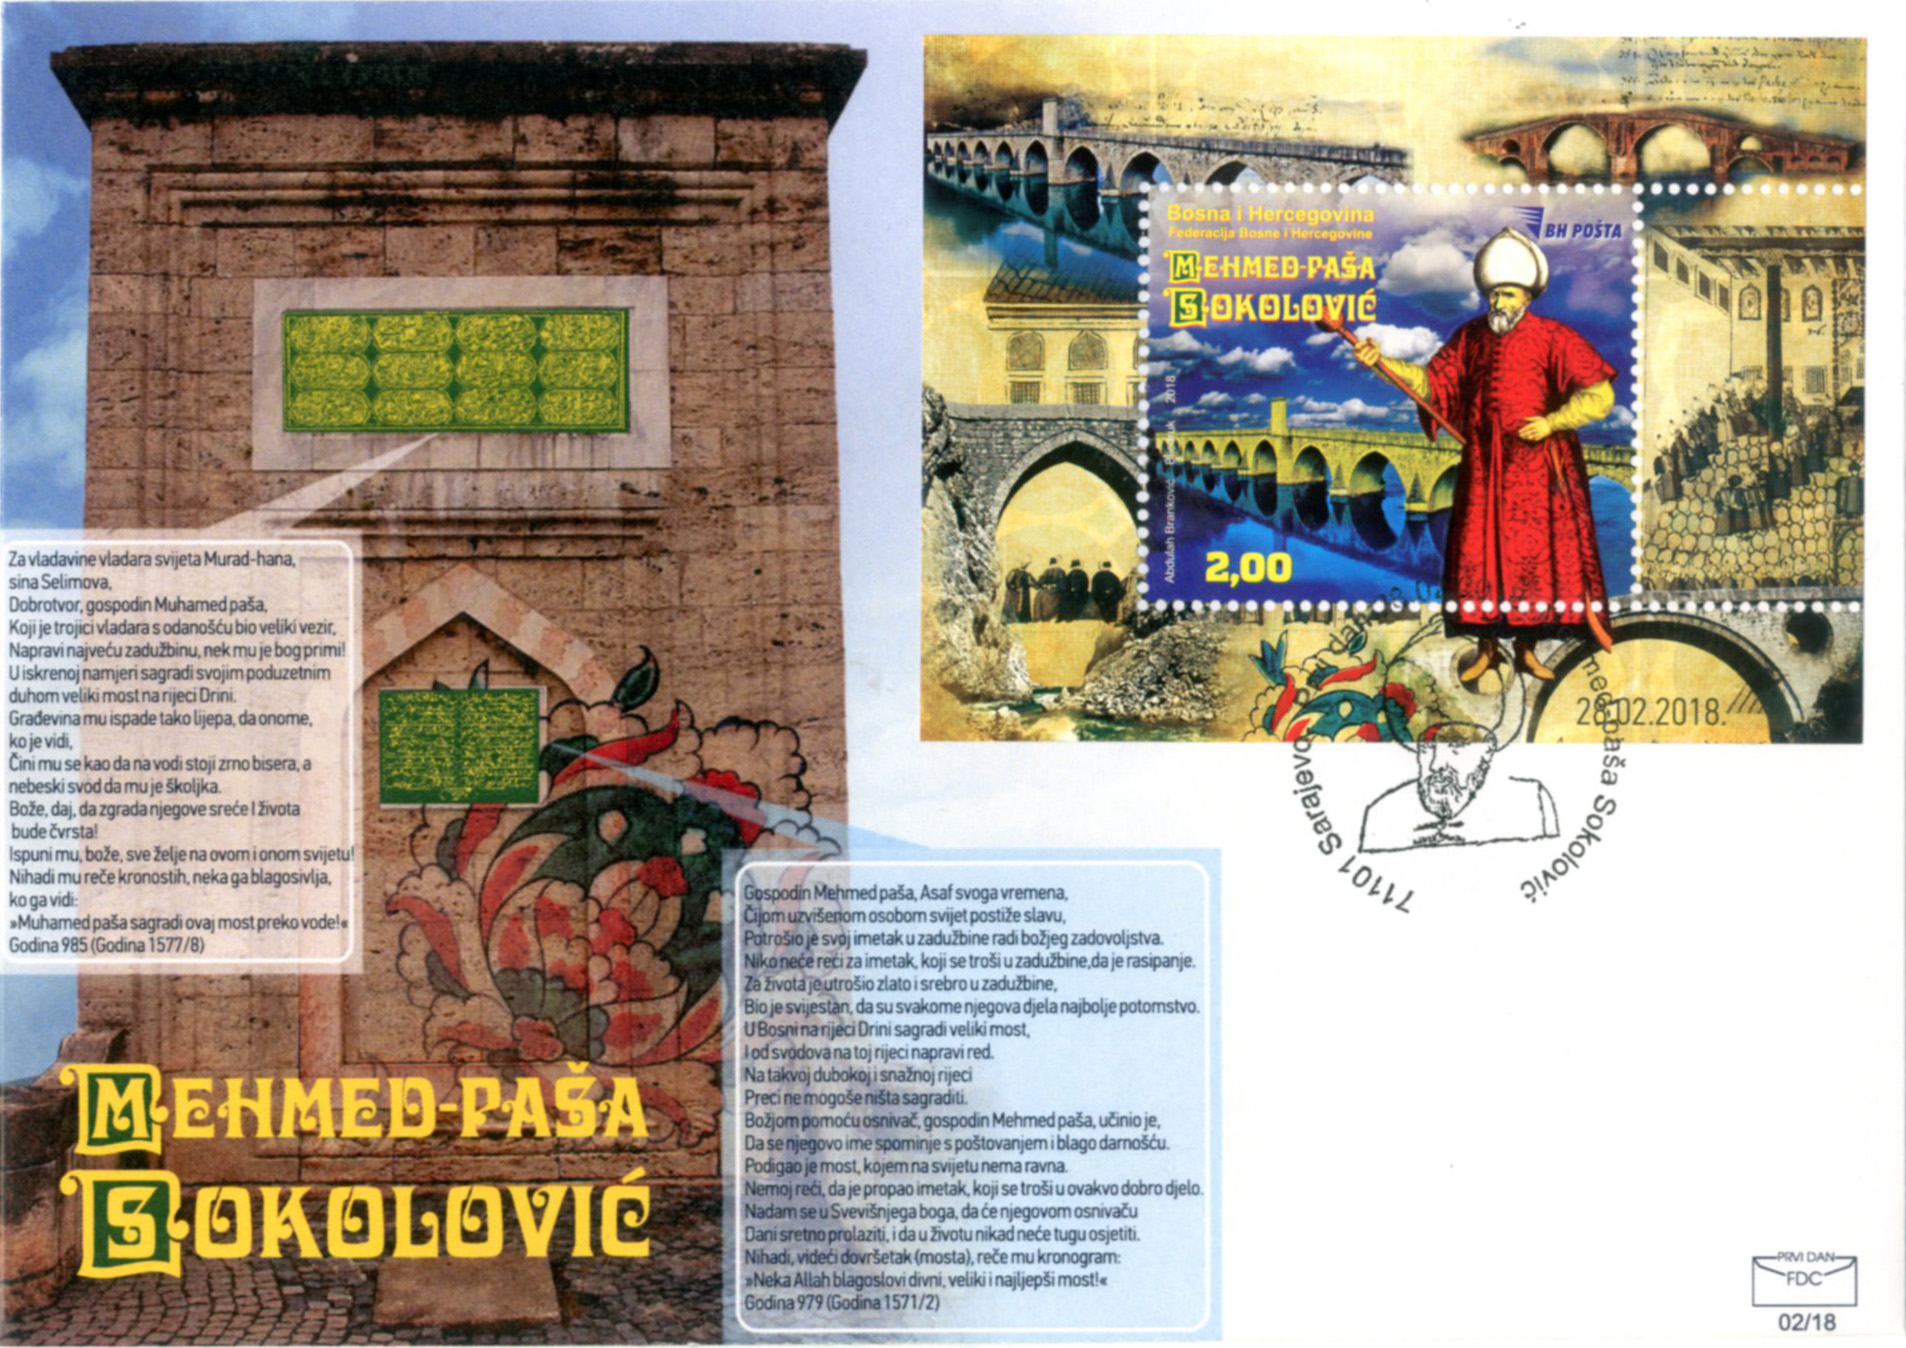 fdc-profile-and-foundation-of-mehmed-pasa-sok